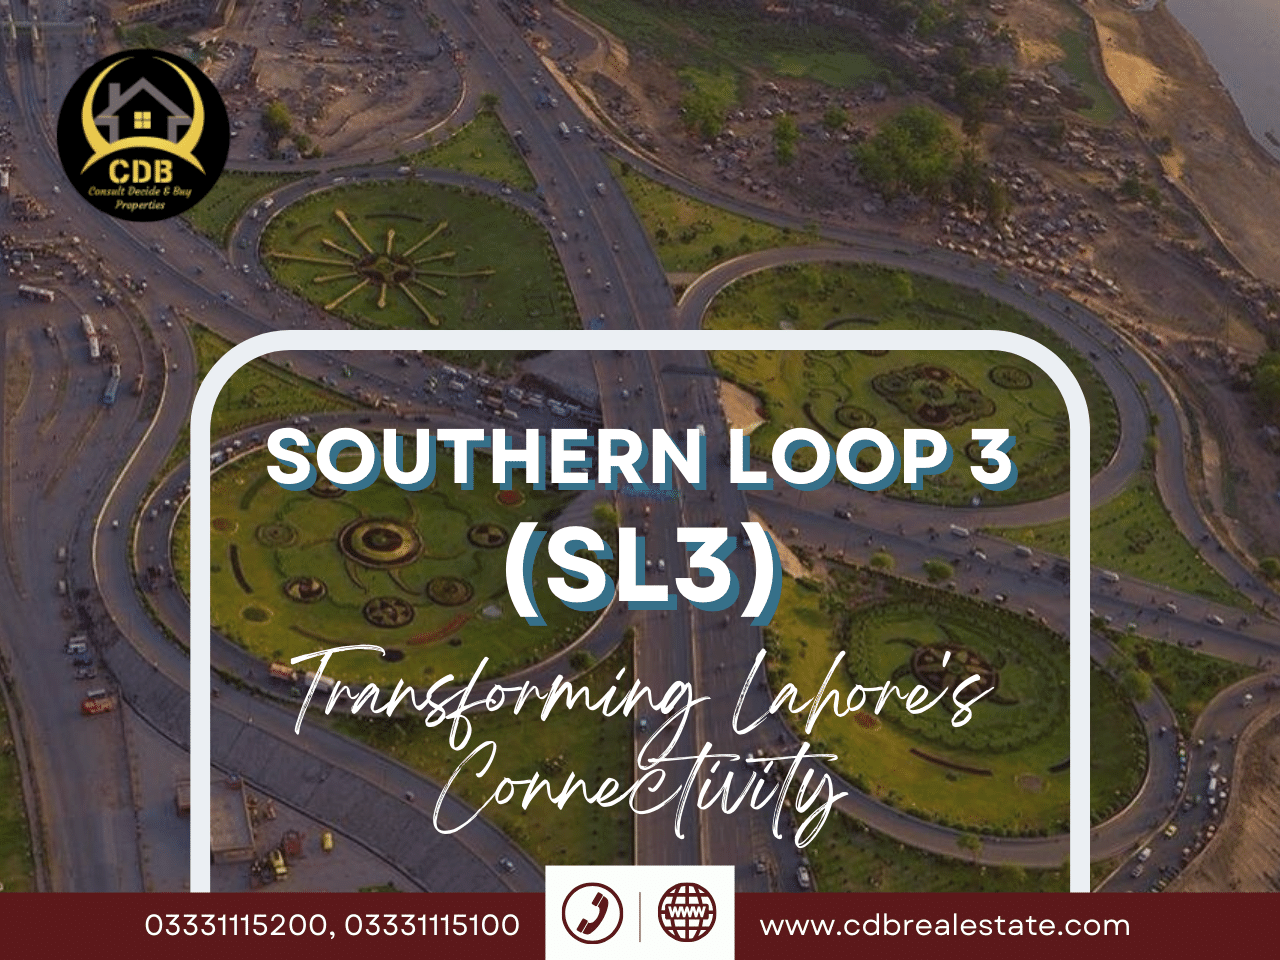 Southern Loop 3 (SL3) Lahore's Connectivity